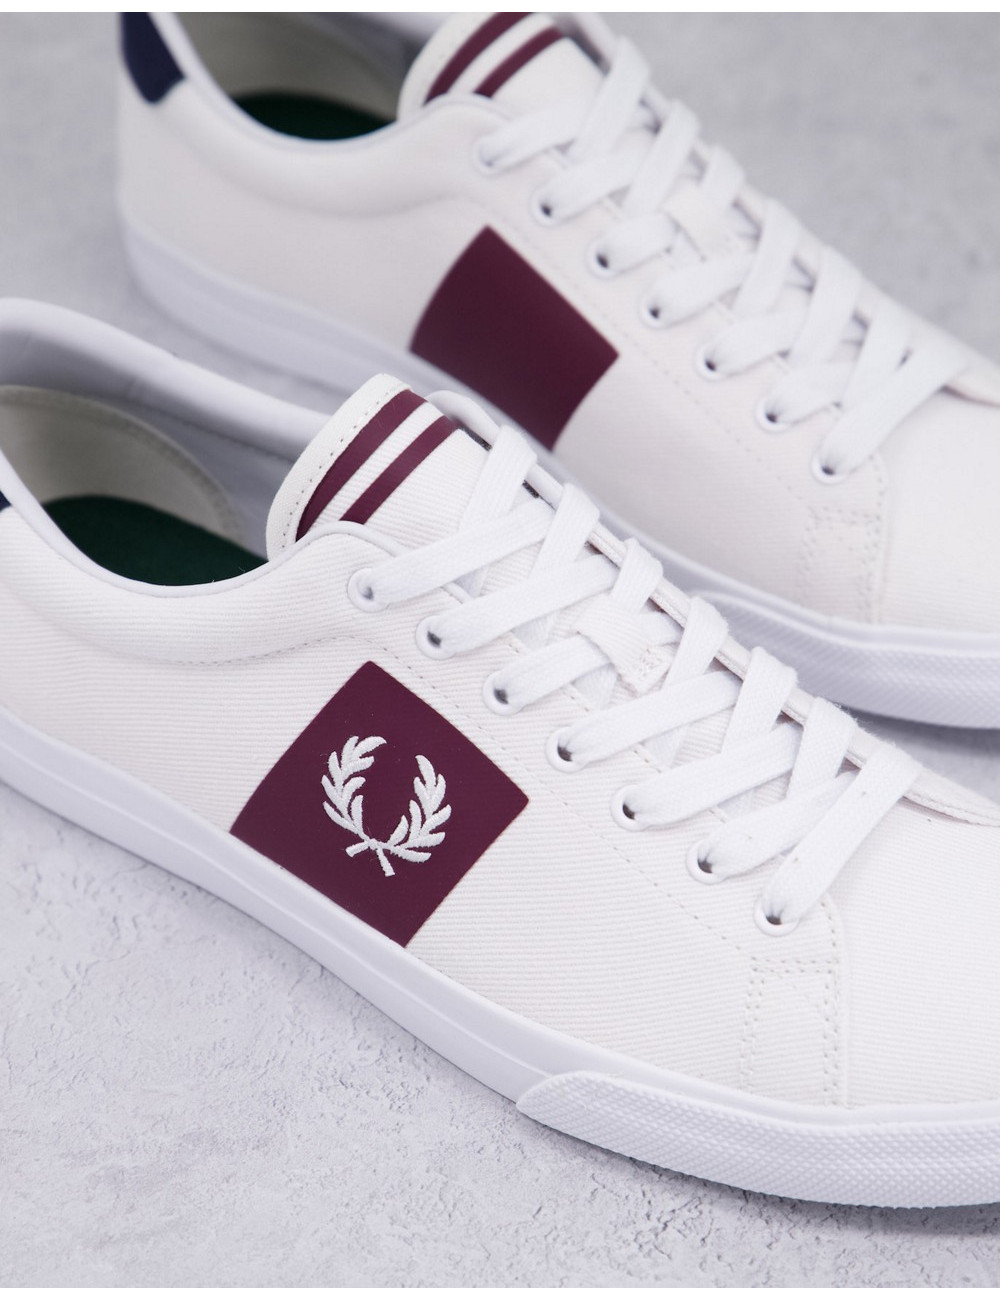 Fred Perry Underspin twill...